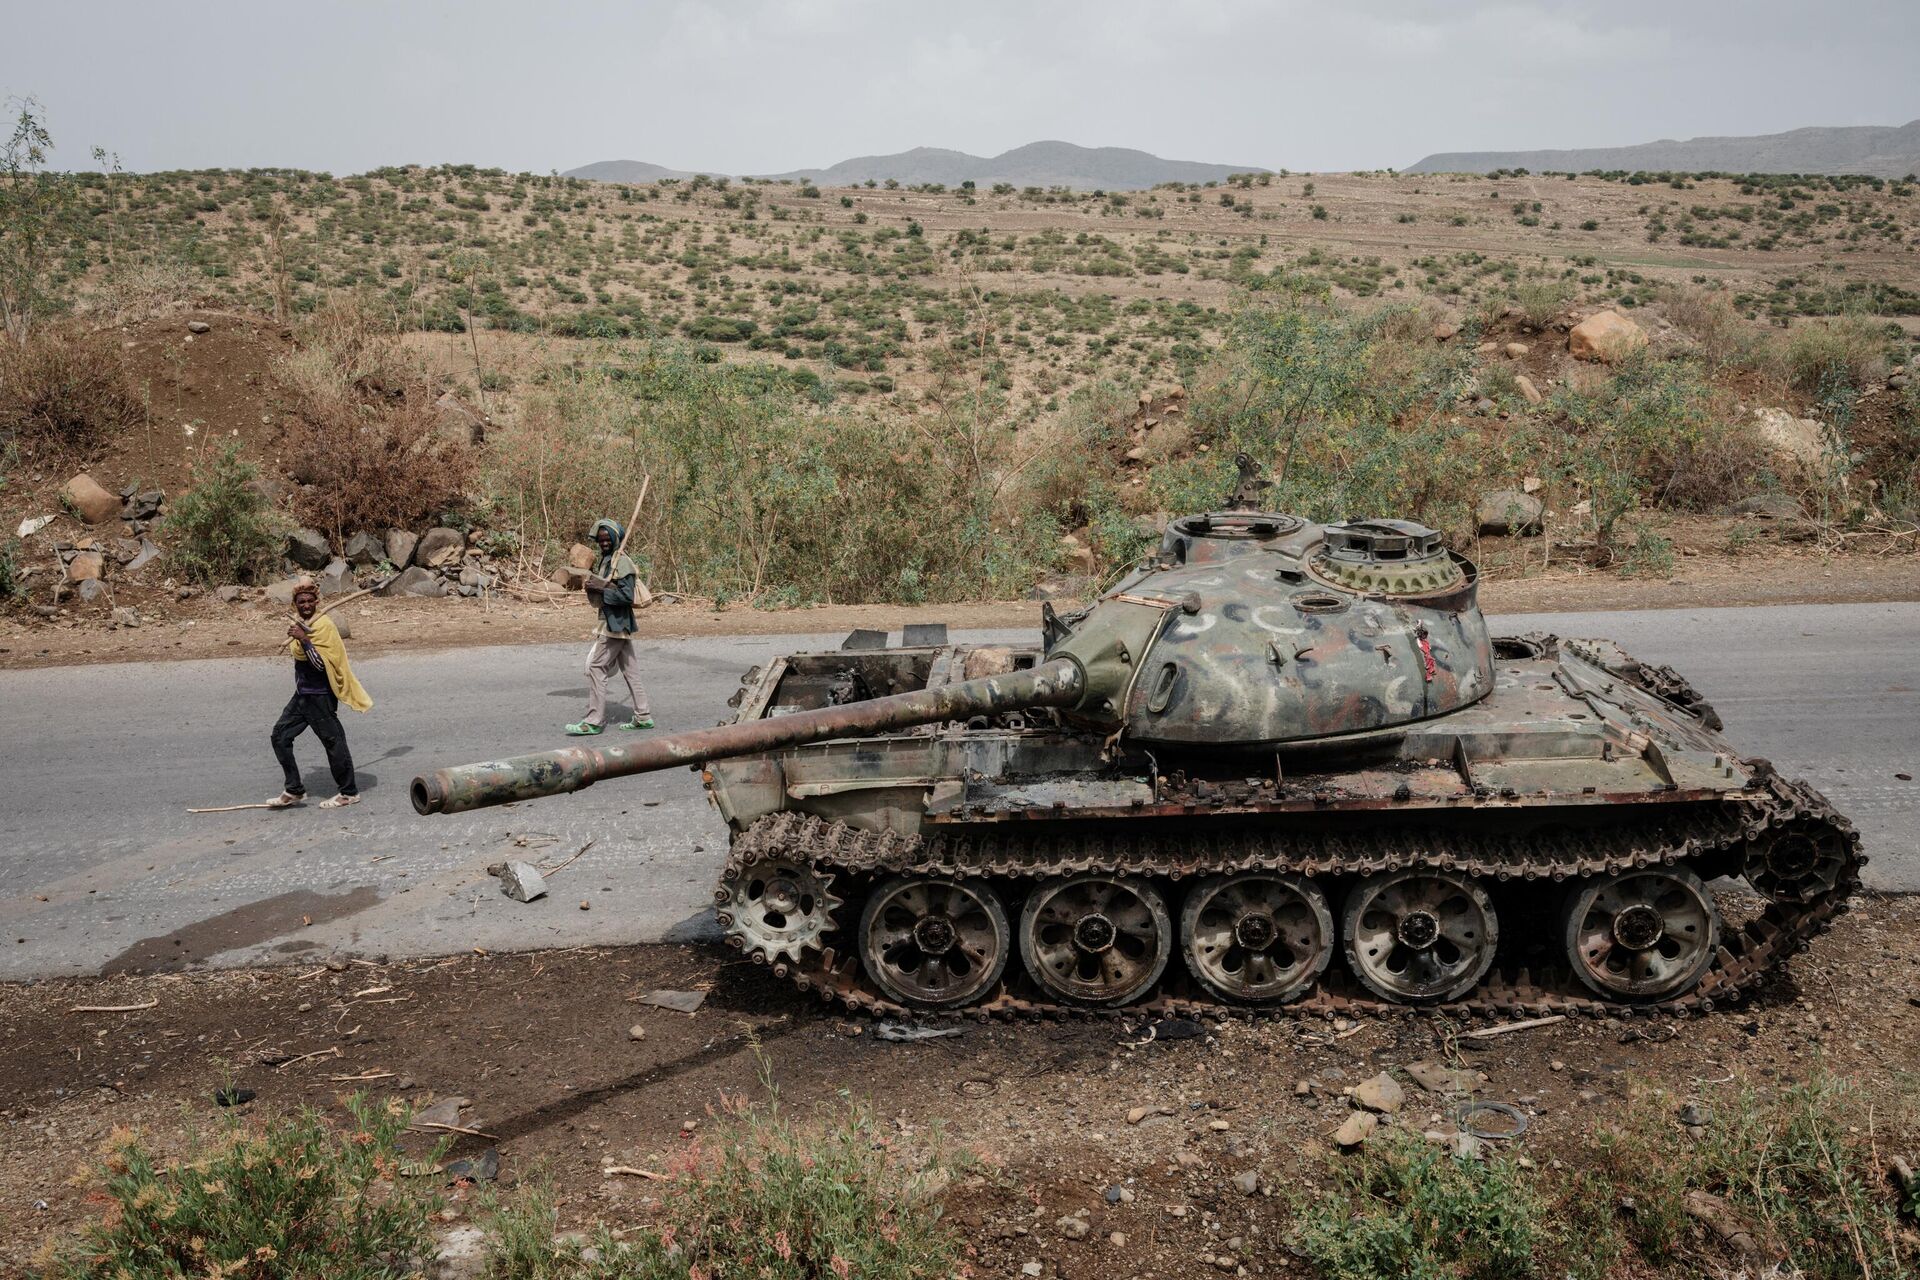 (FILES) In this file photo taken on June 20, 2021 Local farmers walk next to a tank of alledged Eritrean army that is abandoned along the road in Dansa, southwest of Mekele in Tigray region, Ethiopia. - Sputnik International, 1920, 30.08.2022